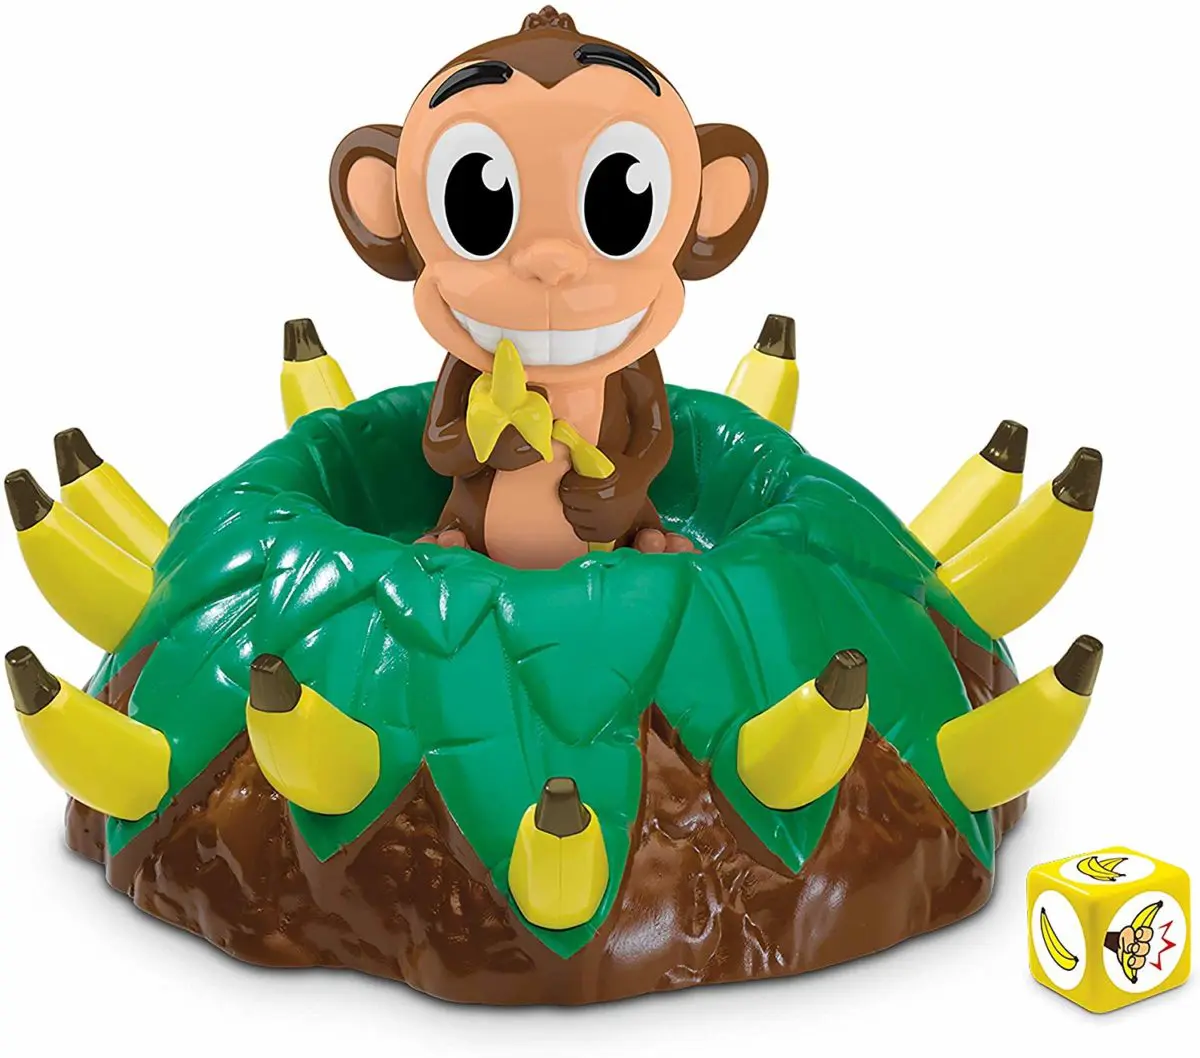 Banana Blast by Goliath - Top Toys and Gifts for Six Year Old Boys 2